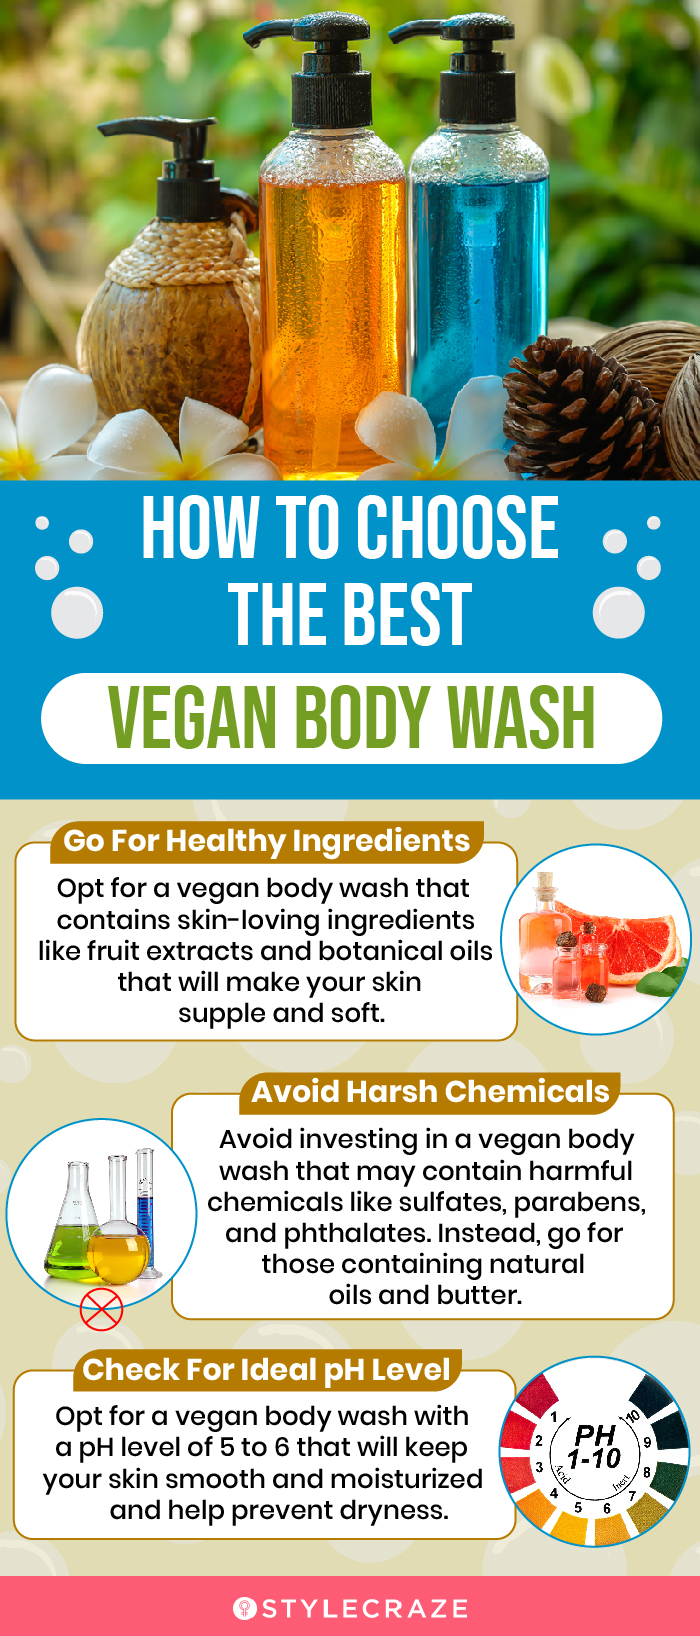 How To Choose The Best Vegan Body Wash (infographic)